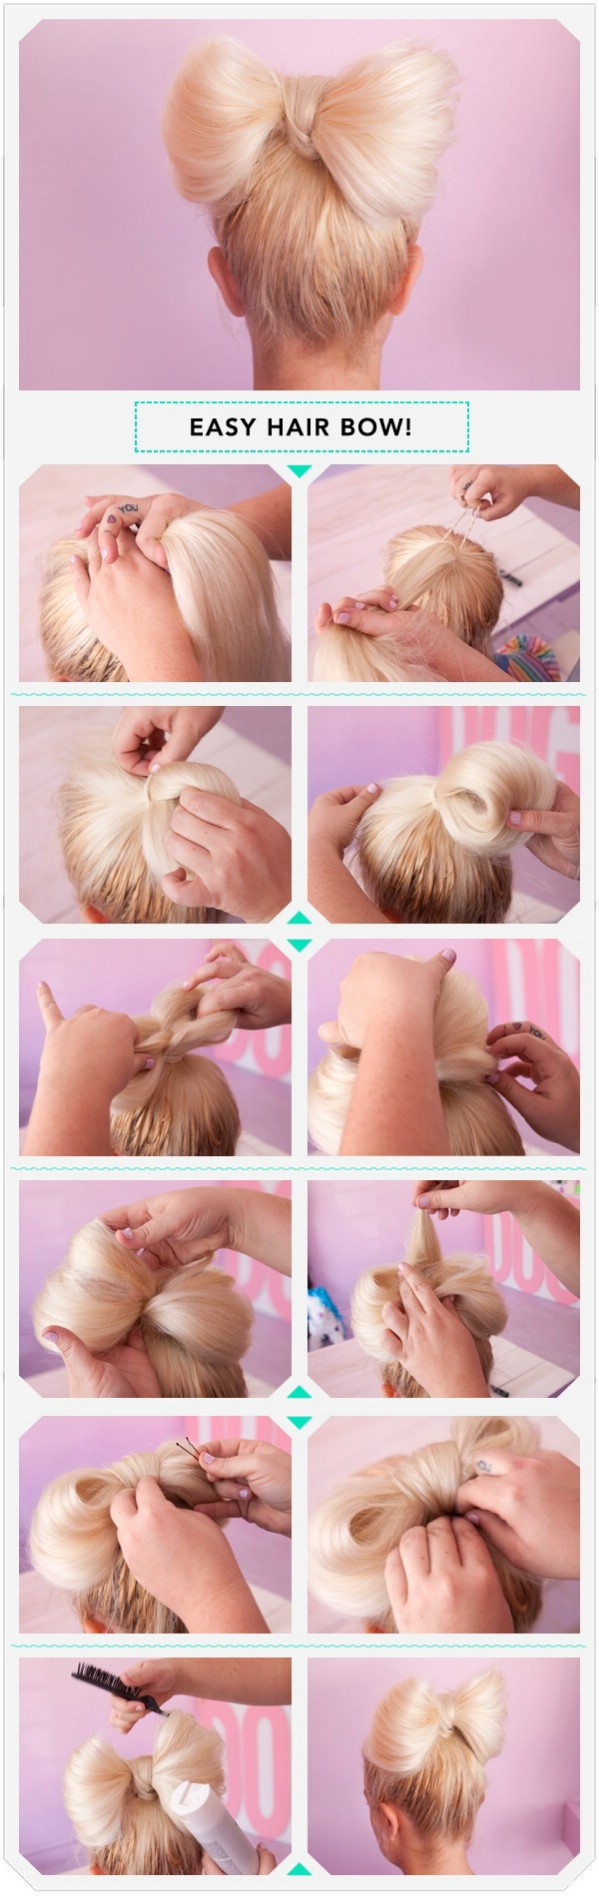 Step by step hair bow creating process